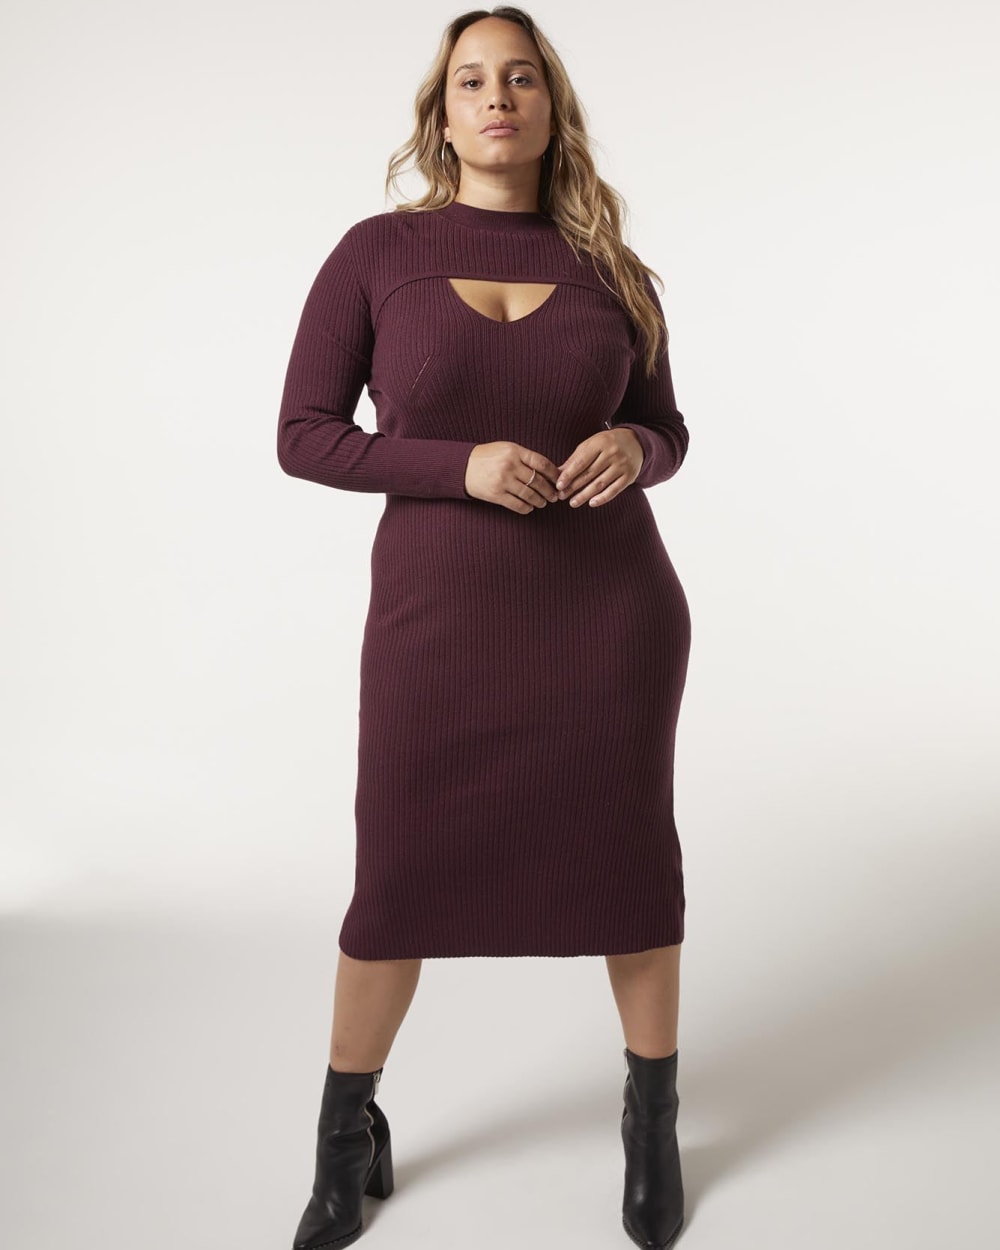 Discover Plus Size Fall Dresses